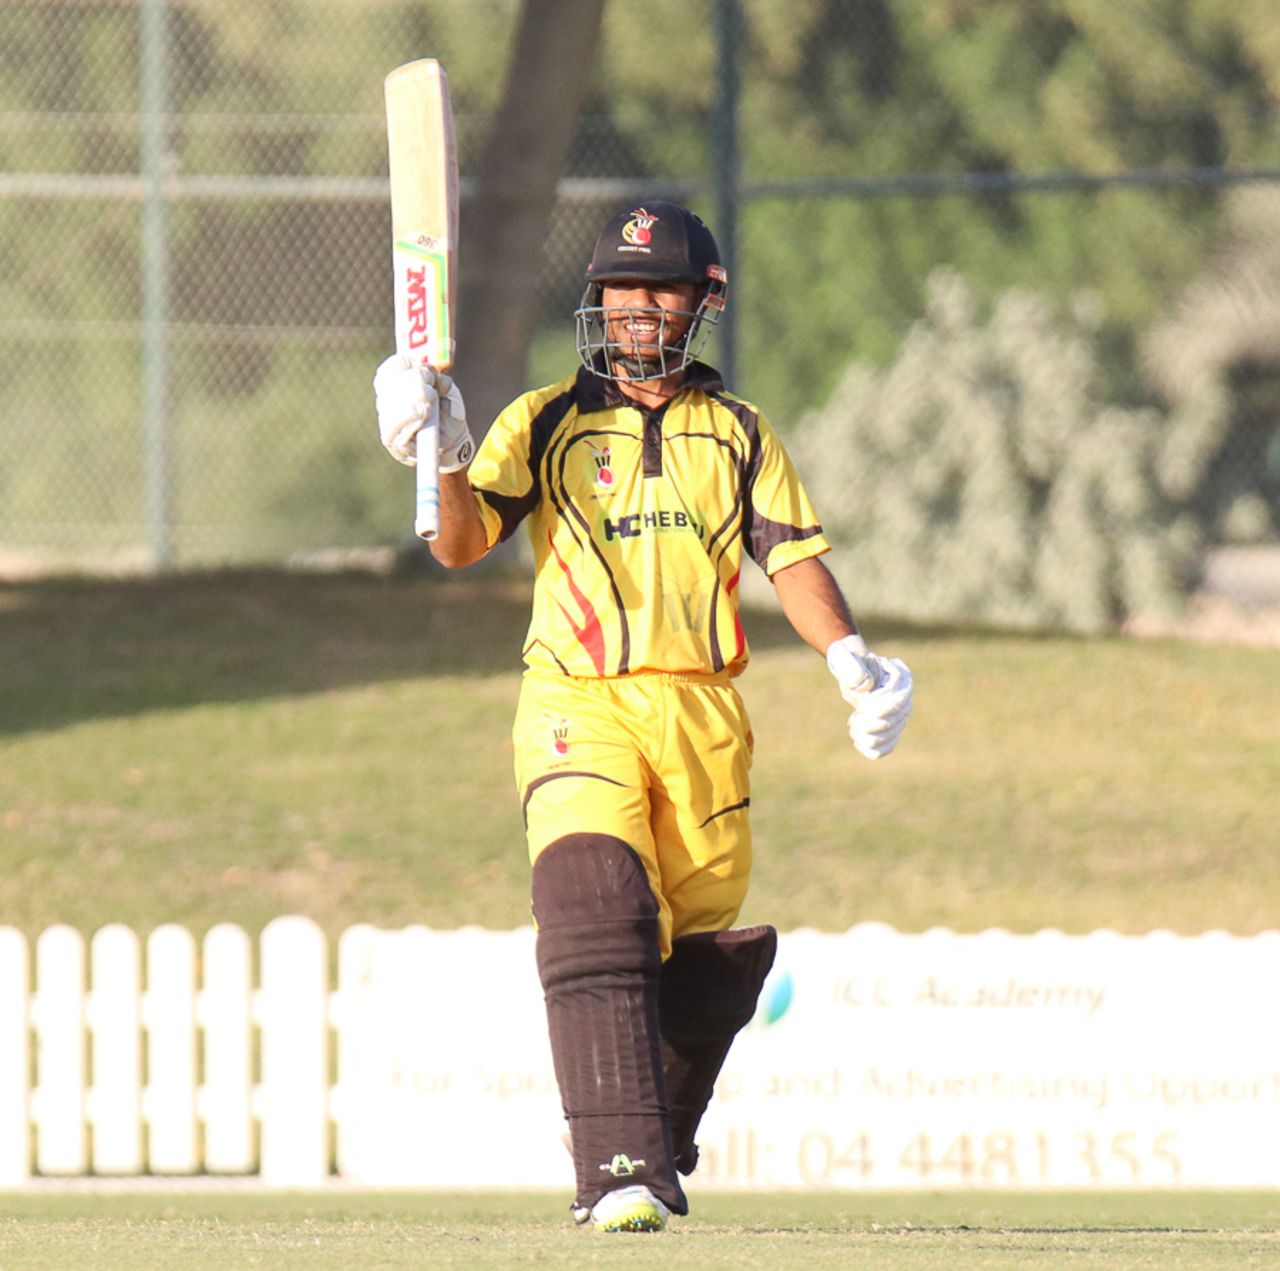 Sese Bau grins and raises his bat after reaching his maiden ODI fifty, Hong Kong v Papua New Guinea, 1st ODI, 2015-17 WCL Championship, Dubai, December 6, 2017